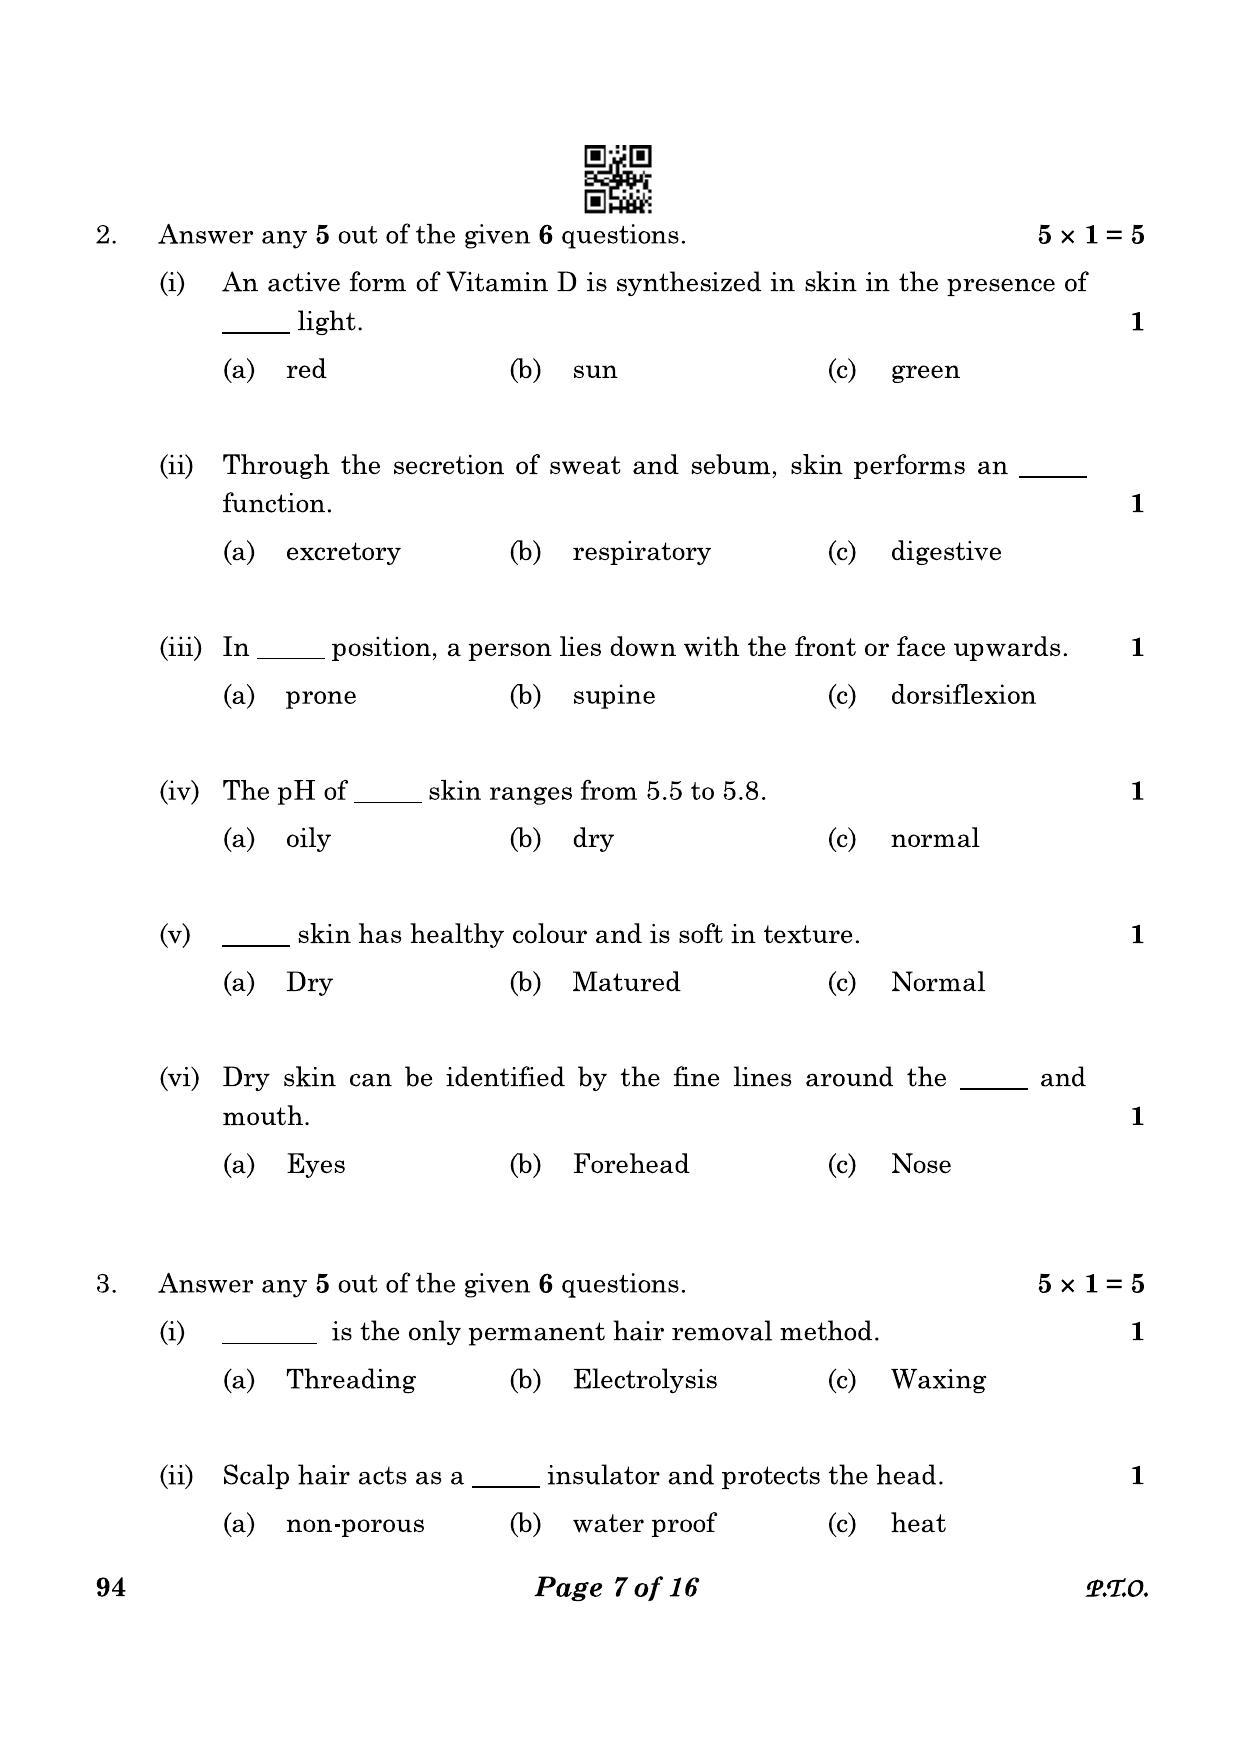 CBSE Class 10 94 Beauty And Wellness 2023 Question Paper - Page 7